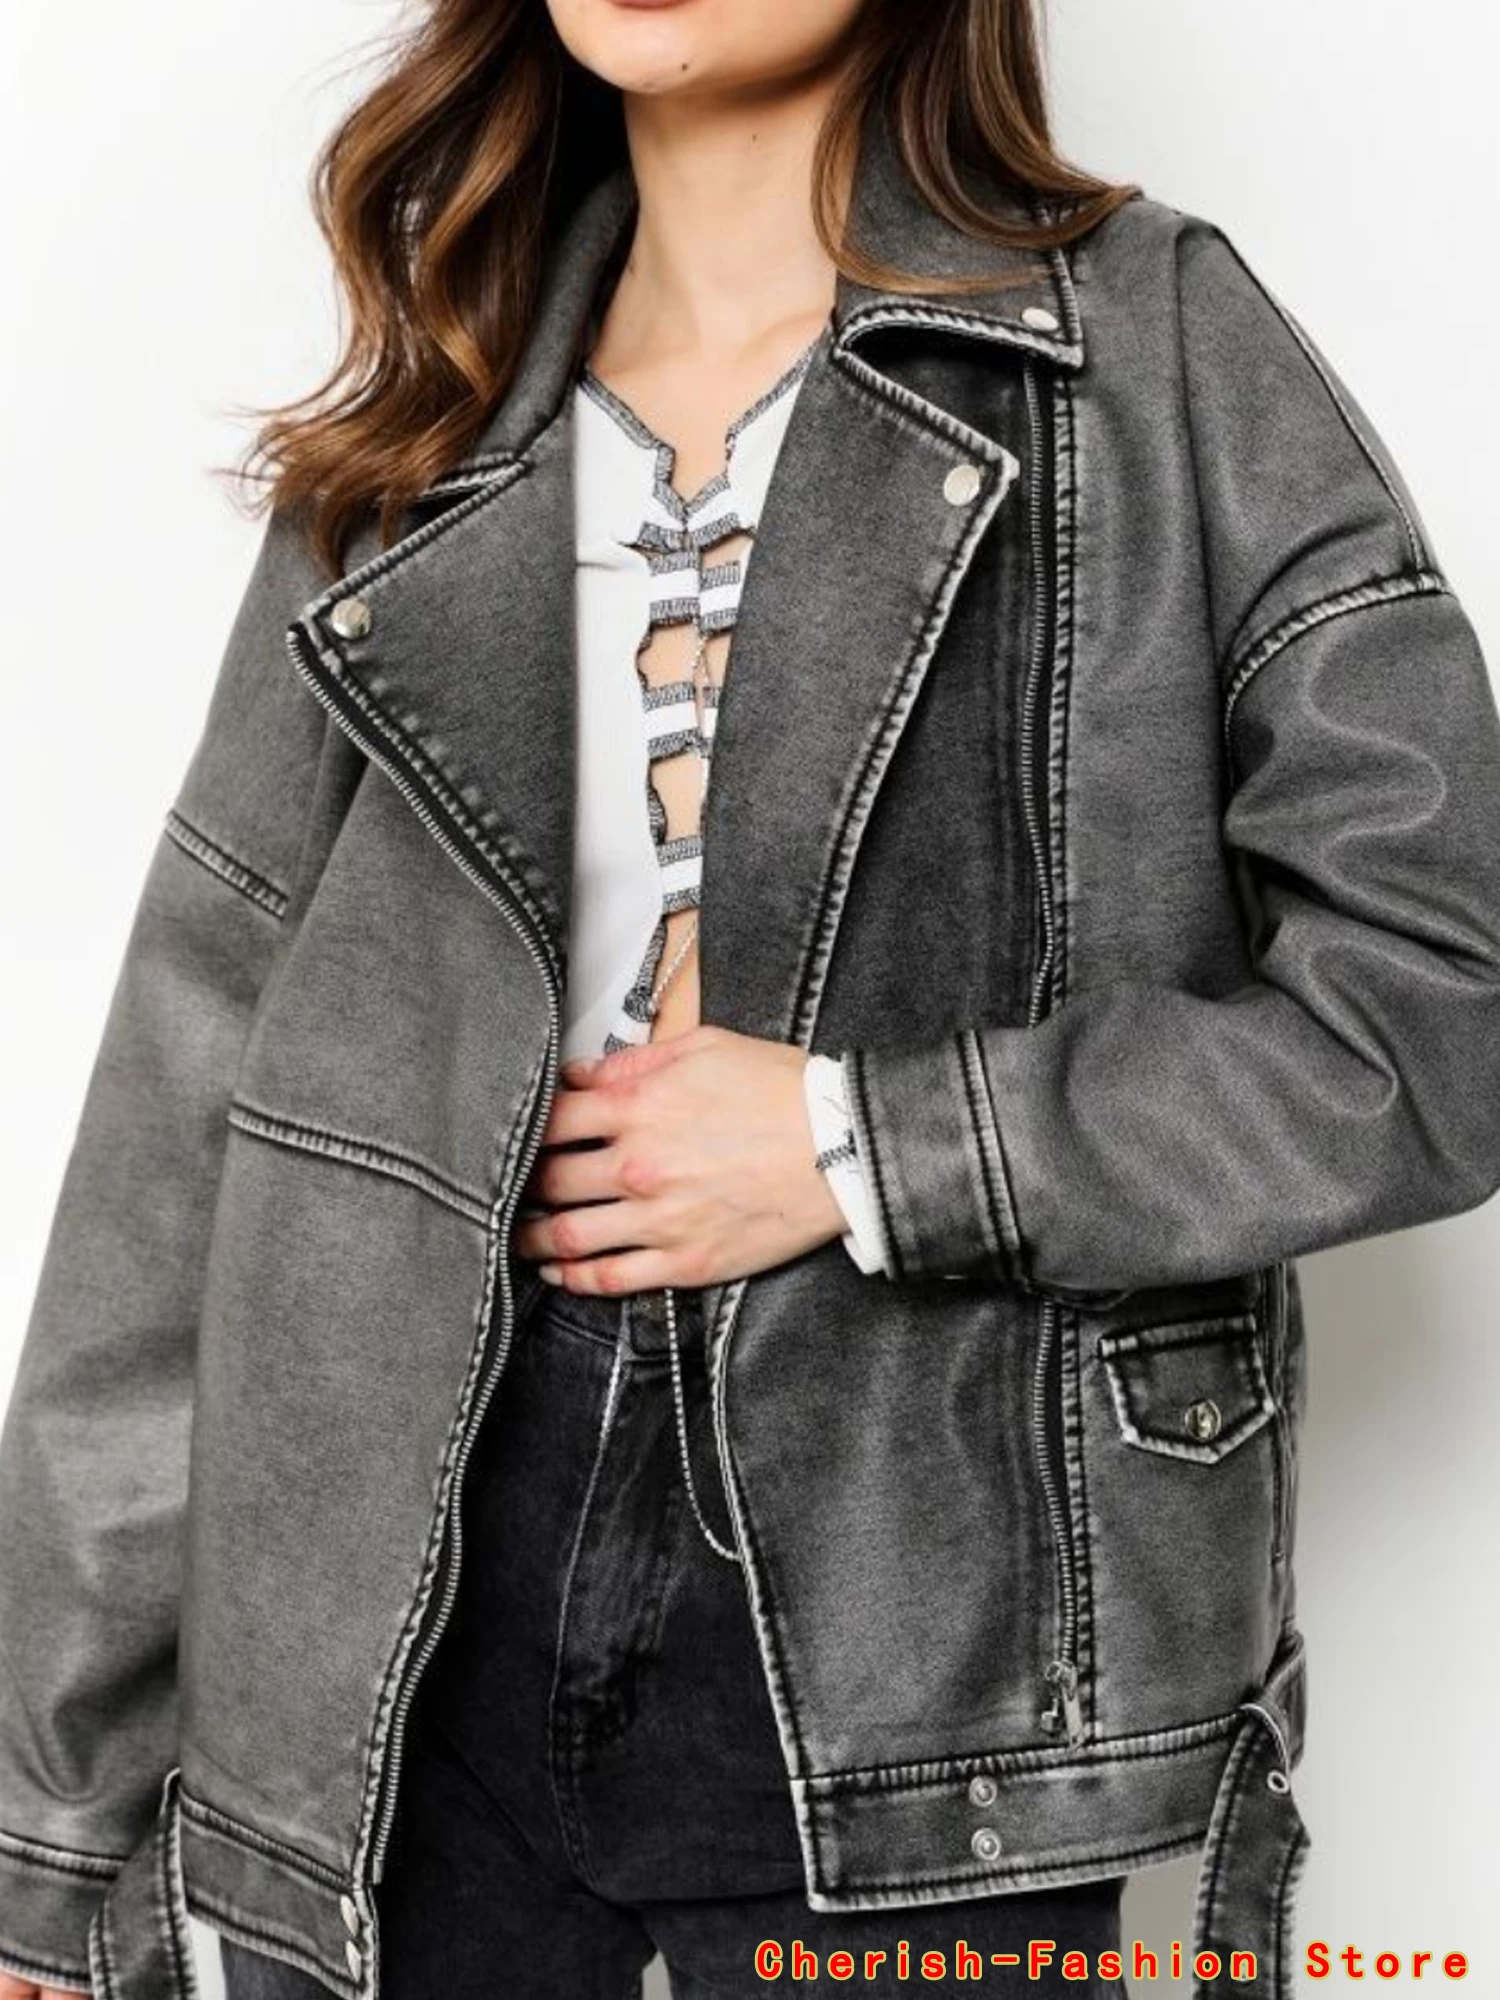 PU Faux Leather Jacket Women Loose Sashes Casual Biker Jackets Outwear Female Tops BF Style Black Leather Jacket Coat Blue Gray